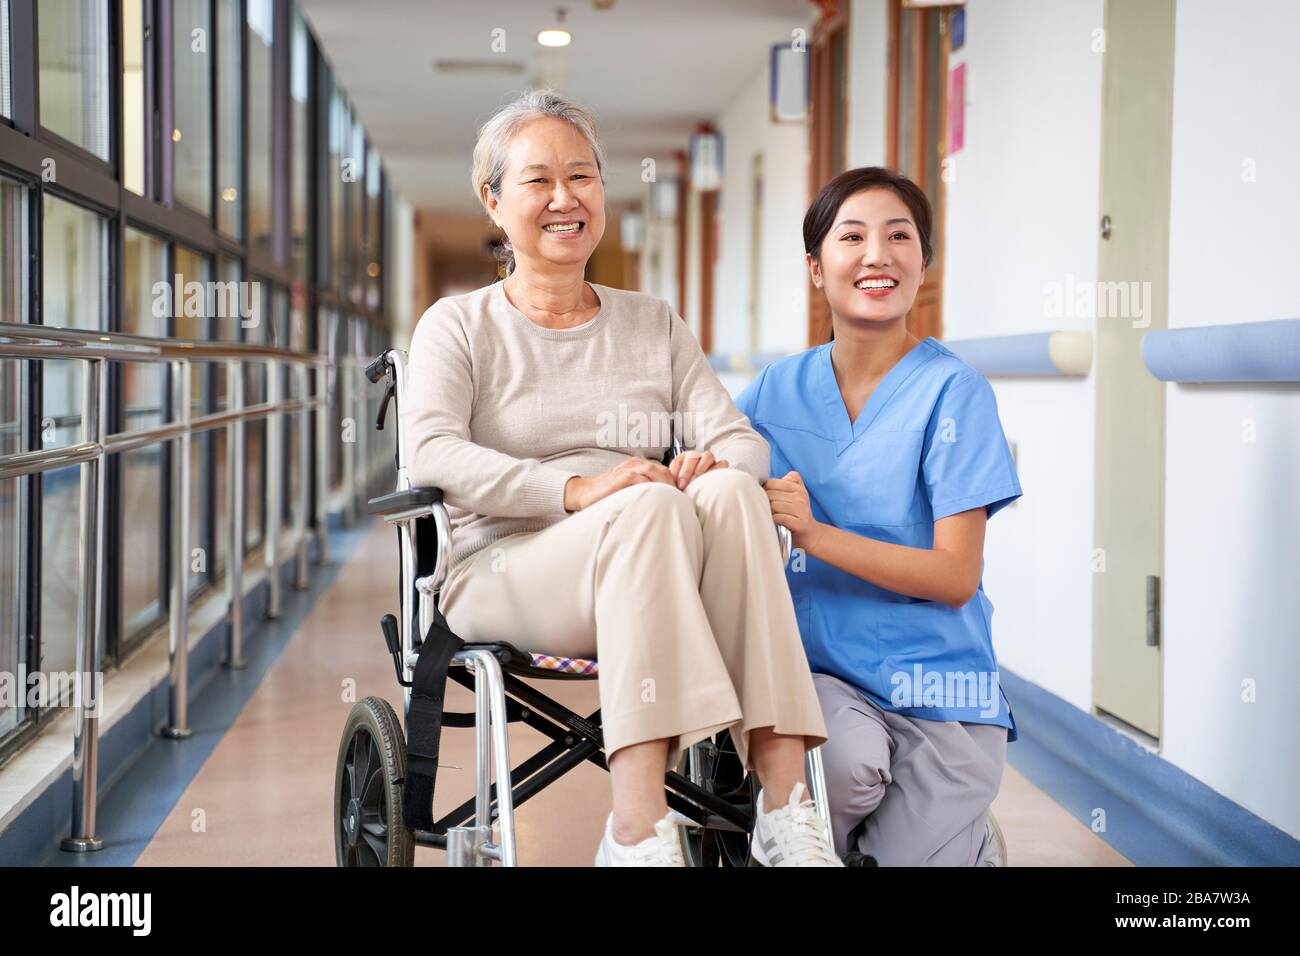 Asian doctor talking with elderly female patient on wheelchair Stock Photo....